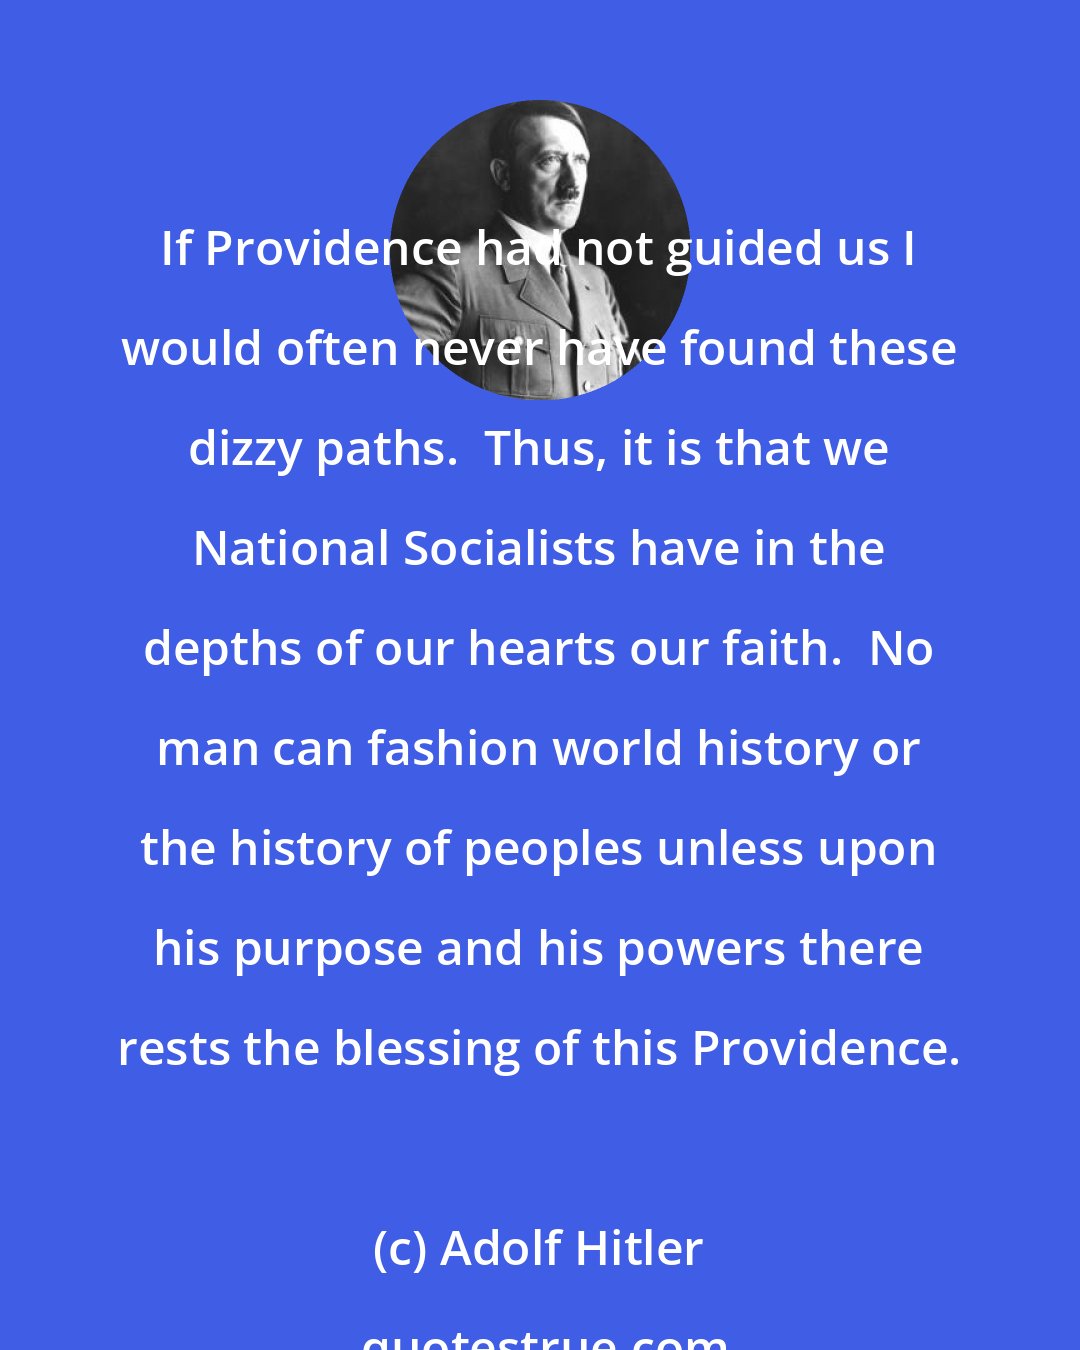 Adolf Hitler: If Providence had not guided us I would often never have found these dizzy paths.  Thus, it is that we National Socialists have in the depths of our hearts our faith.  No man can fashion world history or the history of peoples unless upon his purpose and his powers there rests the blessing of this Providence.